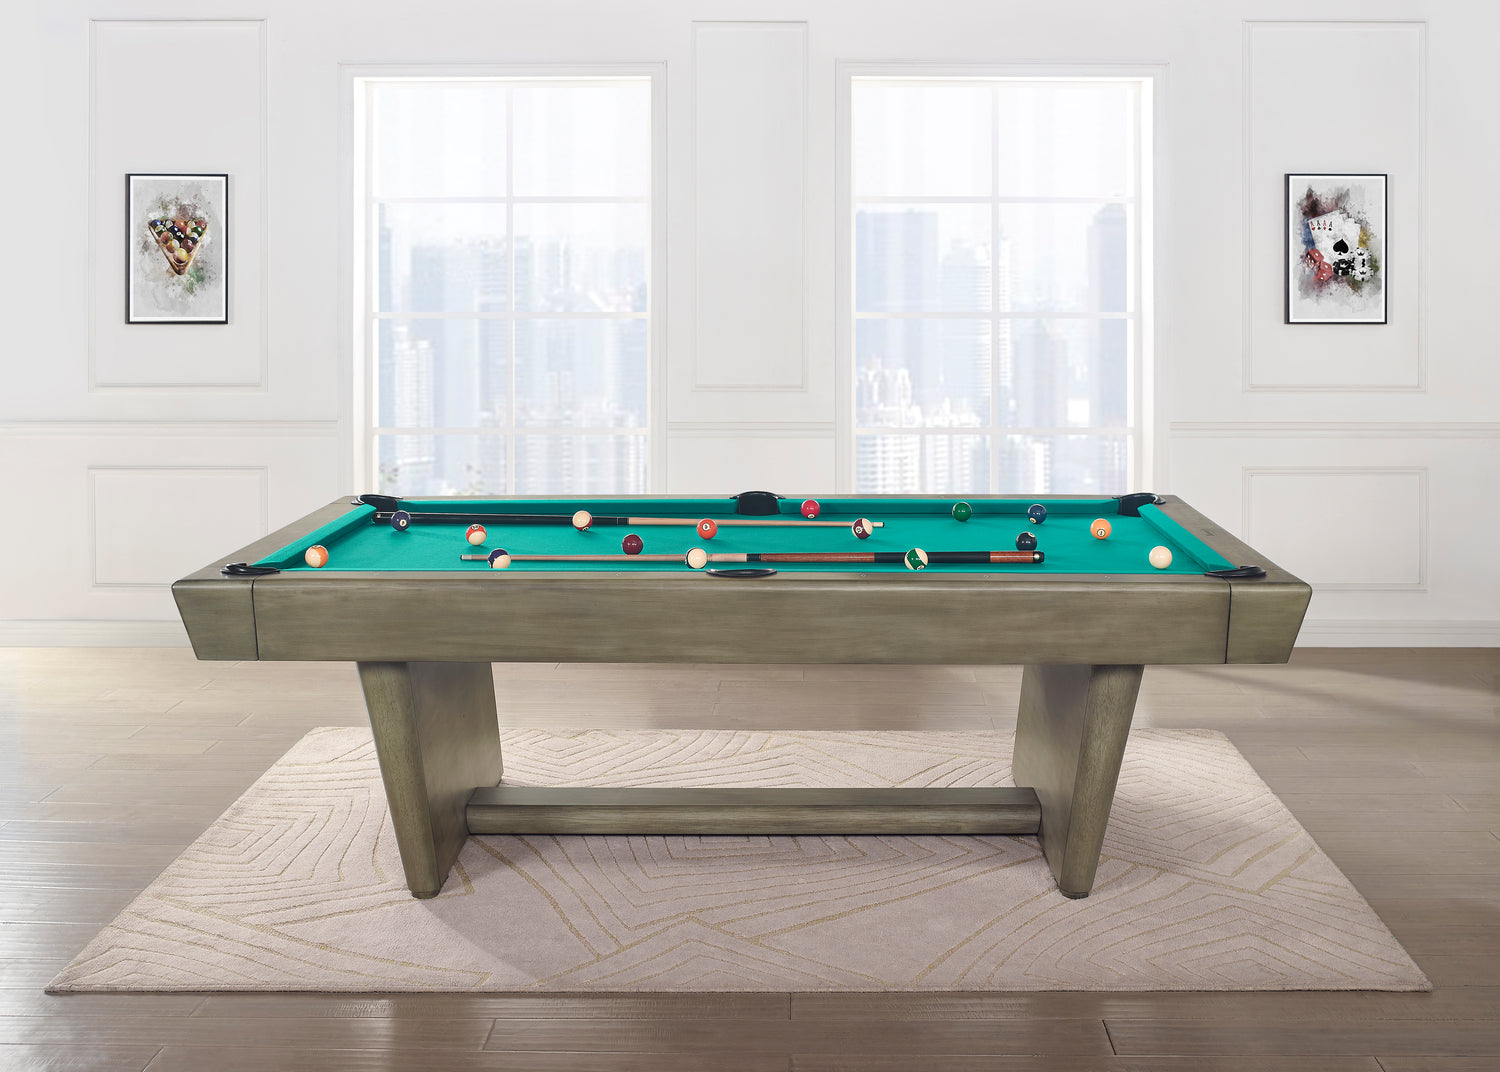 Legacy Billiards Conasauga 8 Ft Pool Table in Overcast Finish with Traditional Green Cloth - Room Scene - Side View